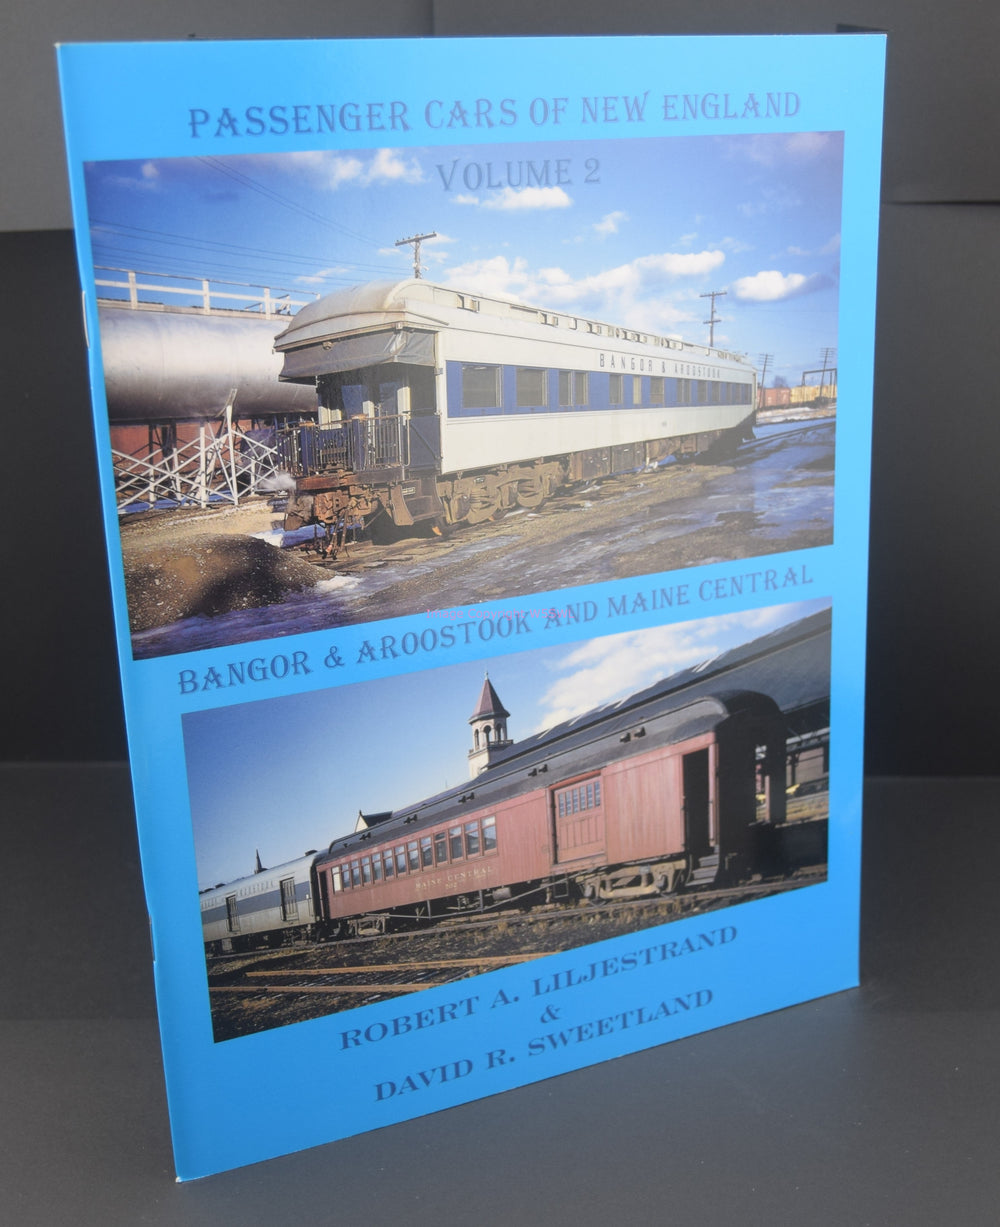 Passenger Cars Of New England - Bangor & Aroostook and Maine Central Volume 2 - Dave's Hobby Shop by W5SWL